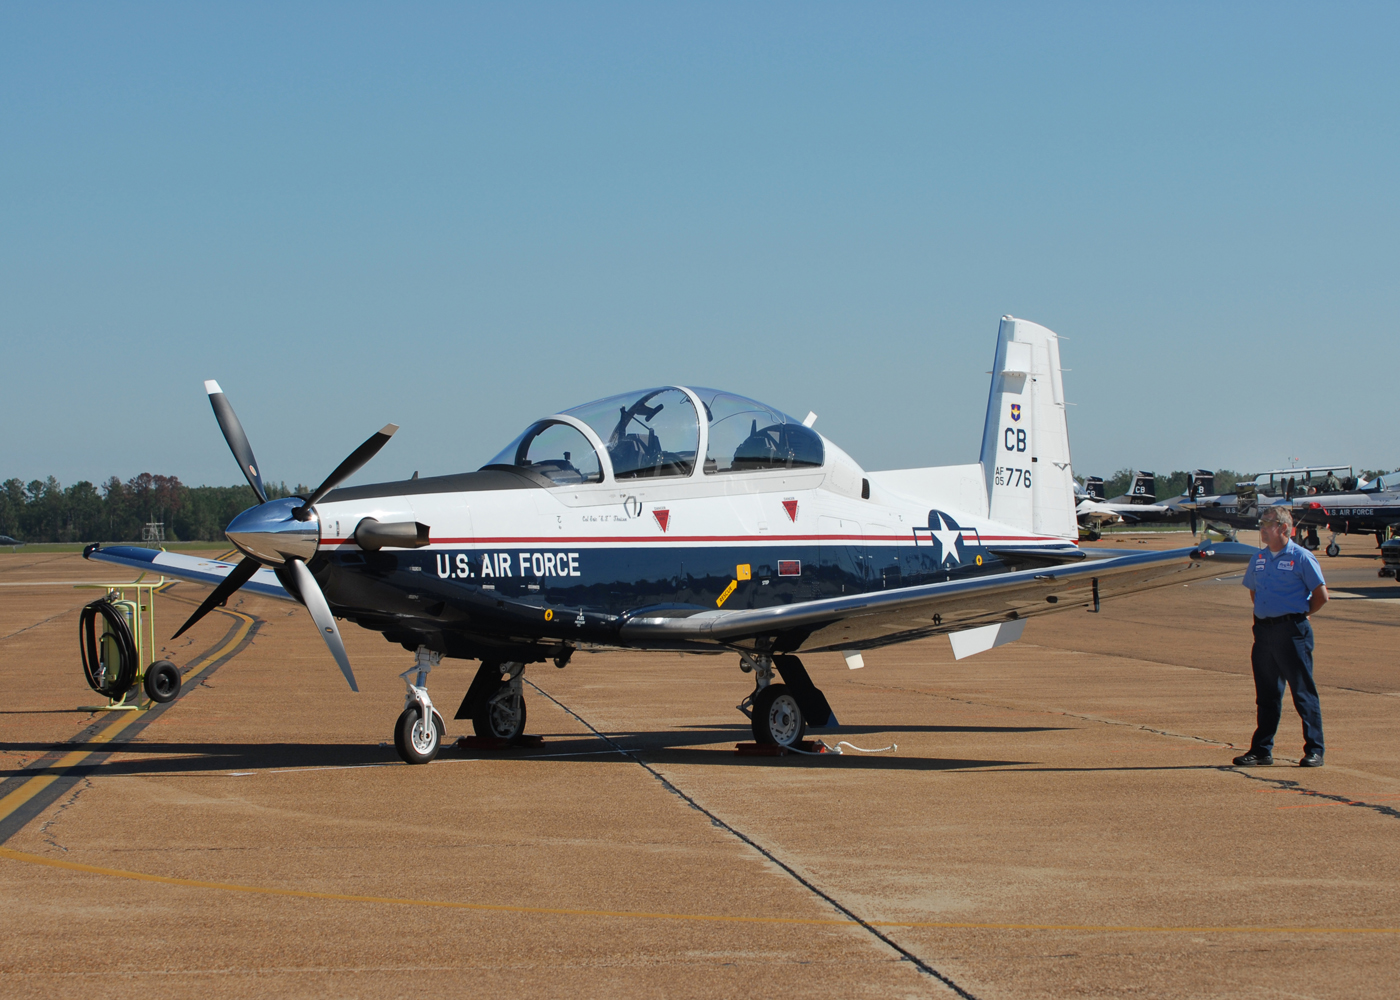 The T-6A Texan II is a single-engine, two-seat primary trainer designed to train Joint Primary Pilot Training students in basic flying skills common to US Air Force and Navy pilots